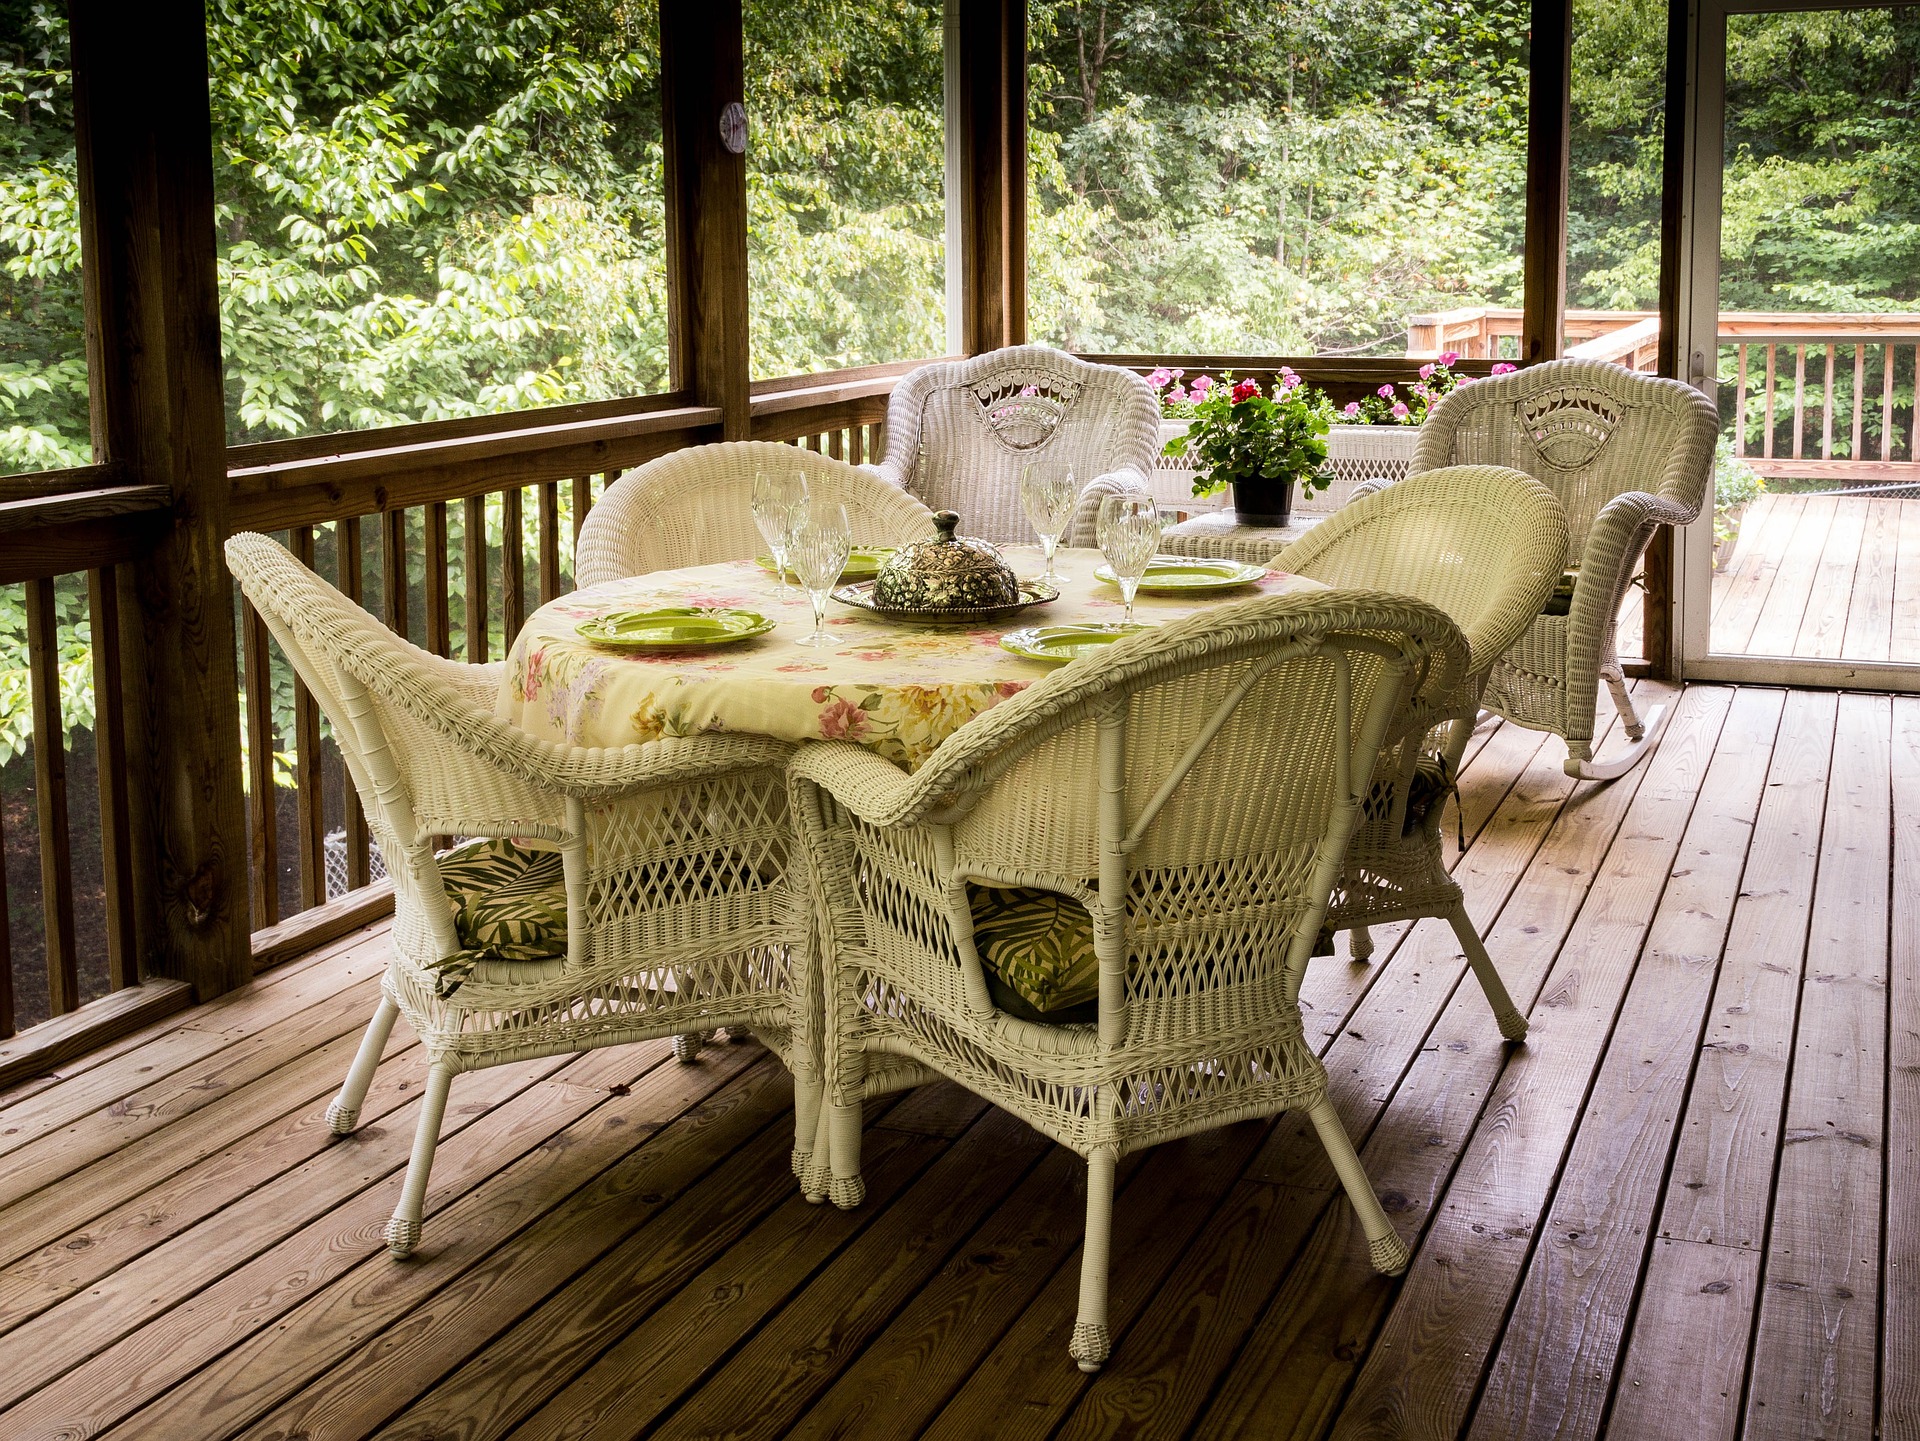 Are rattan and wicker the same thing?